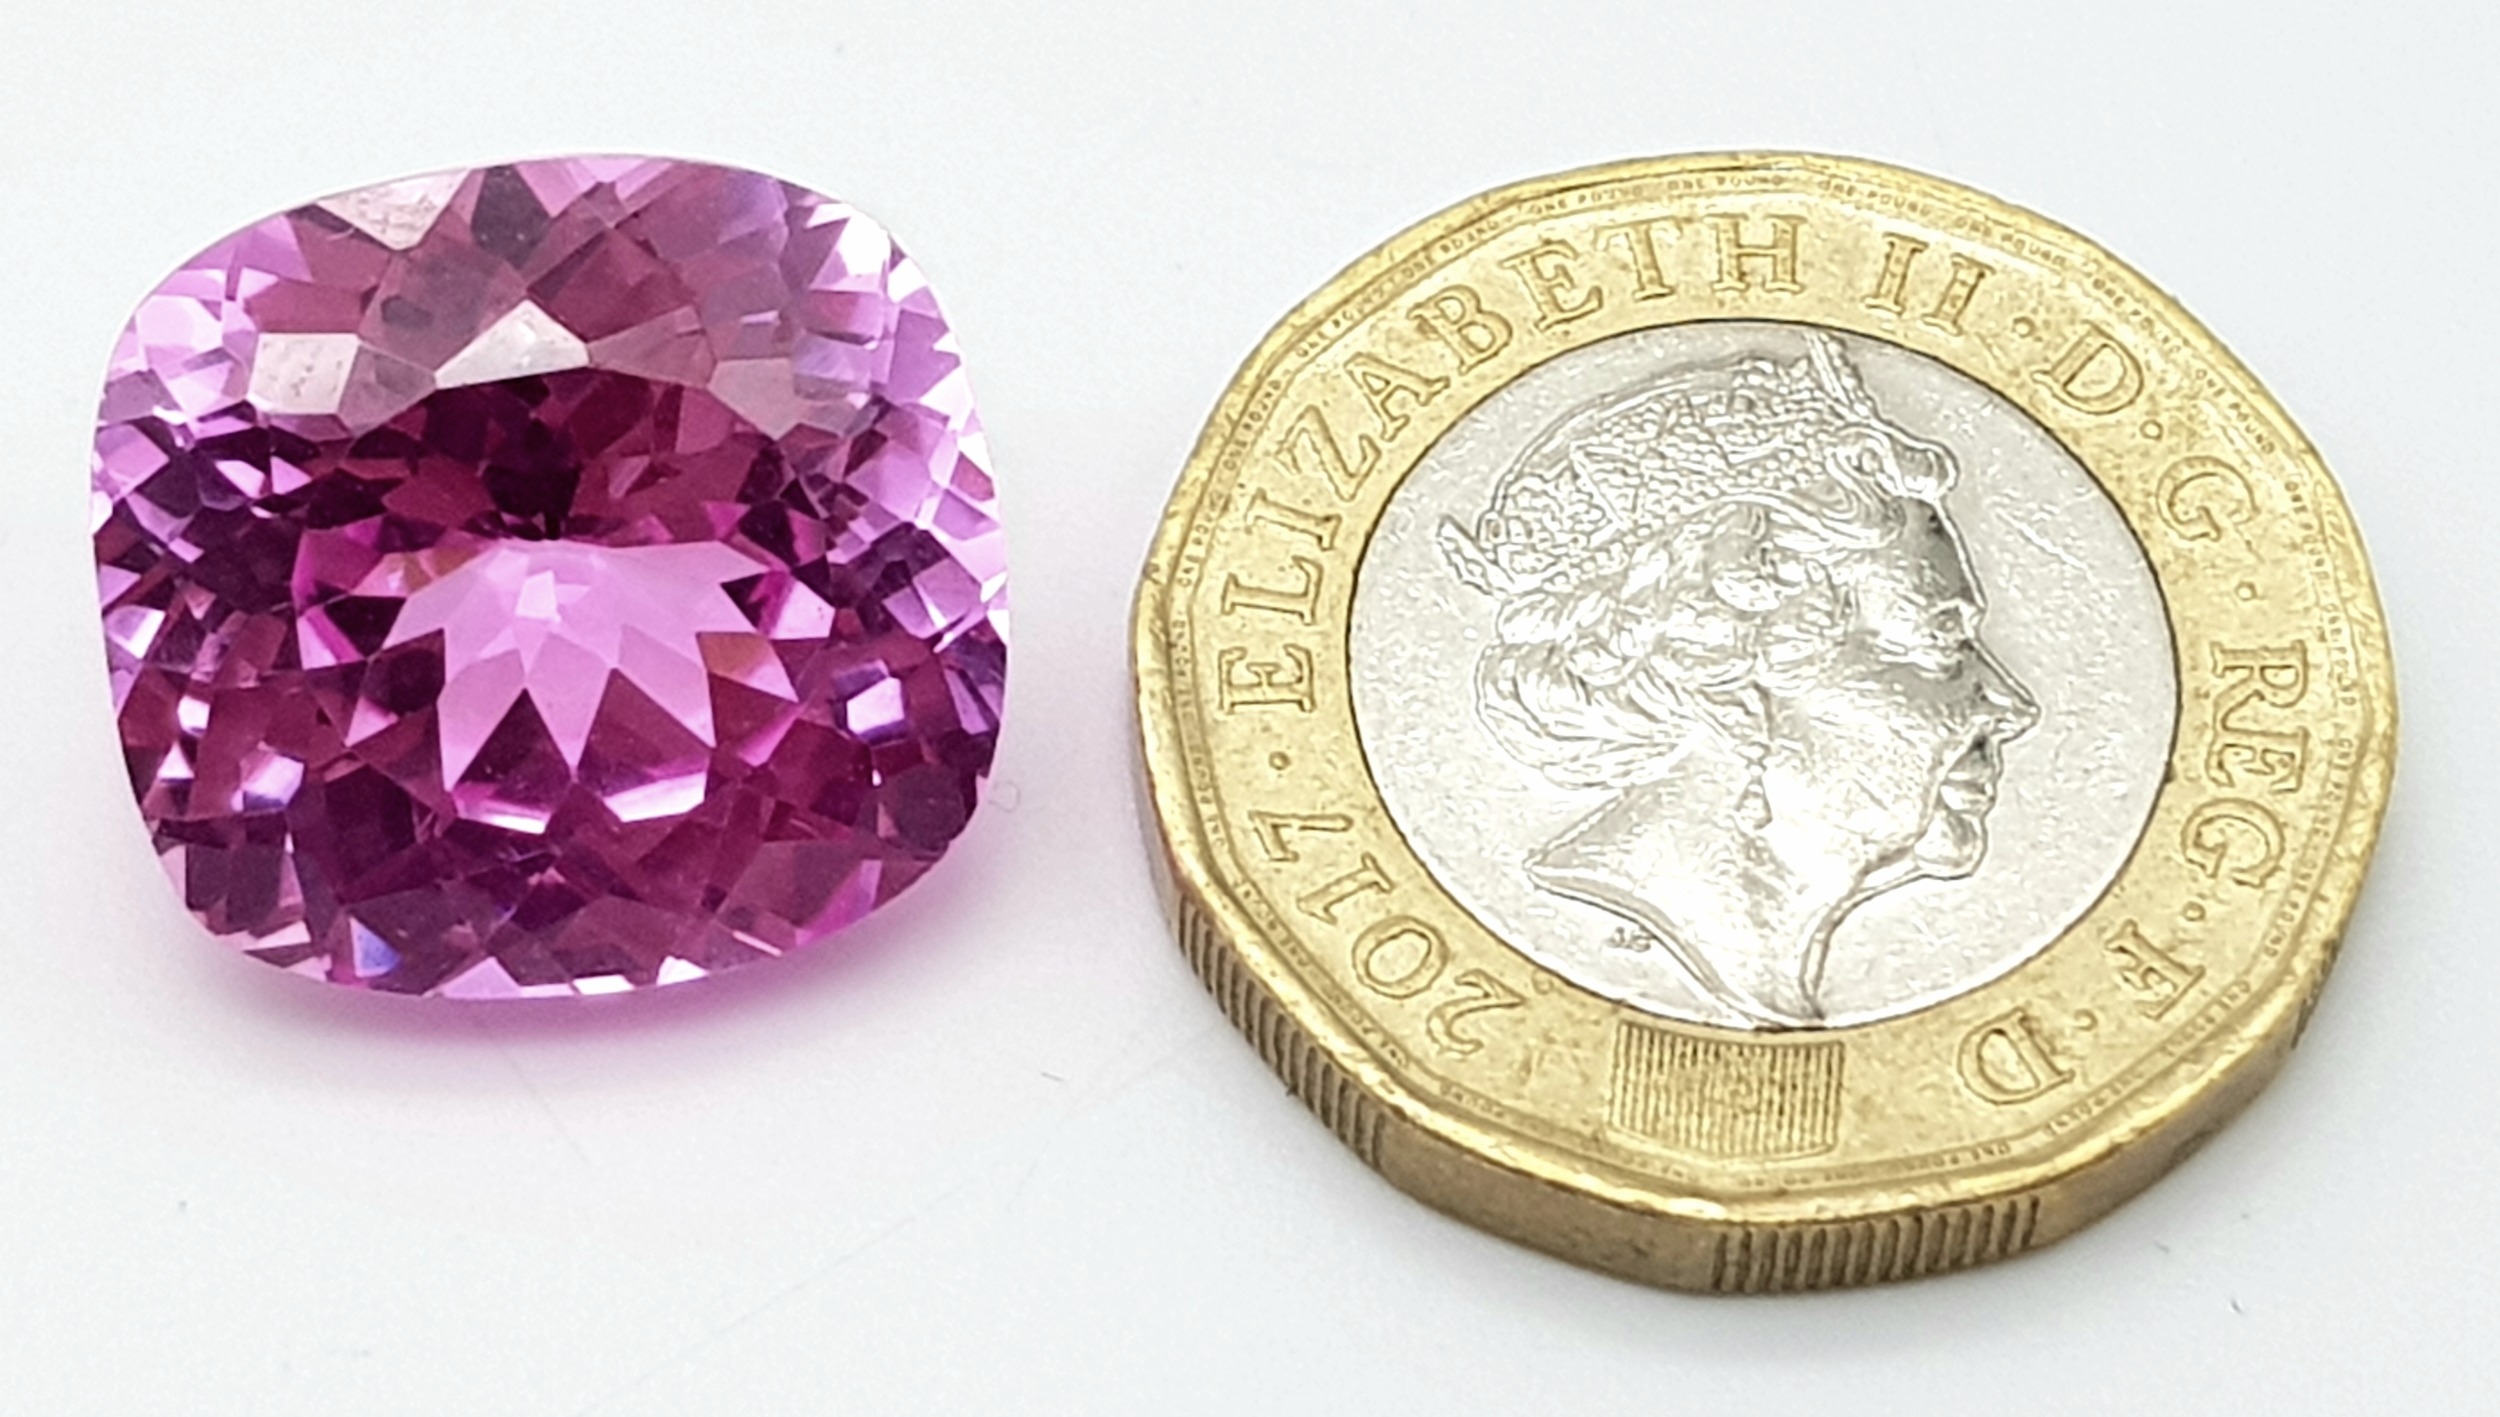 A Beautiful 21ct Pink Kunzite Gemstone. Cushion cut. Well faceted. No certificate so as found. - Image 4 of 4